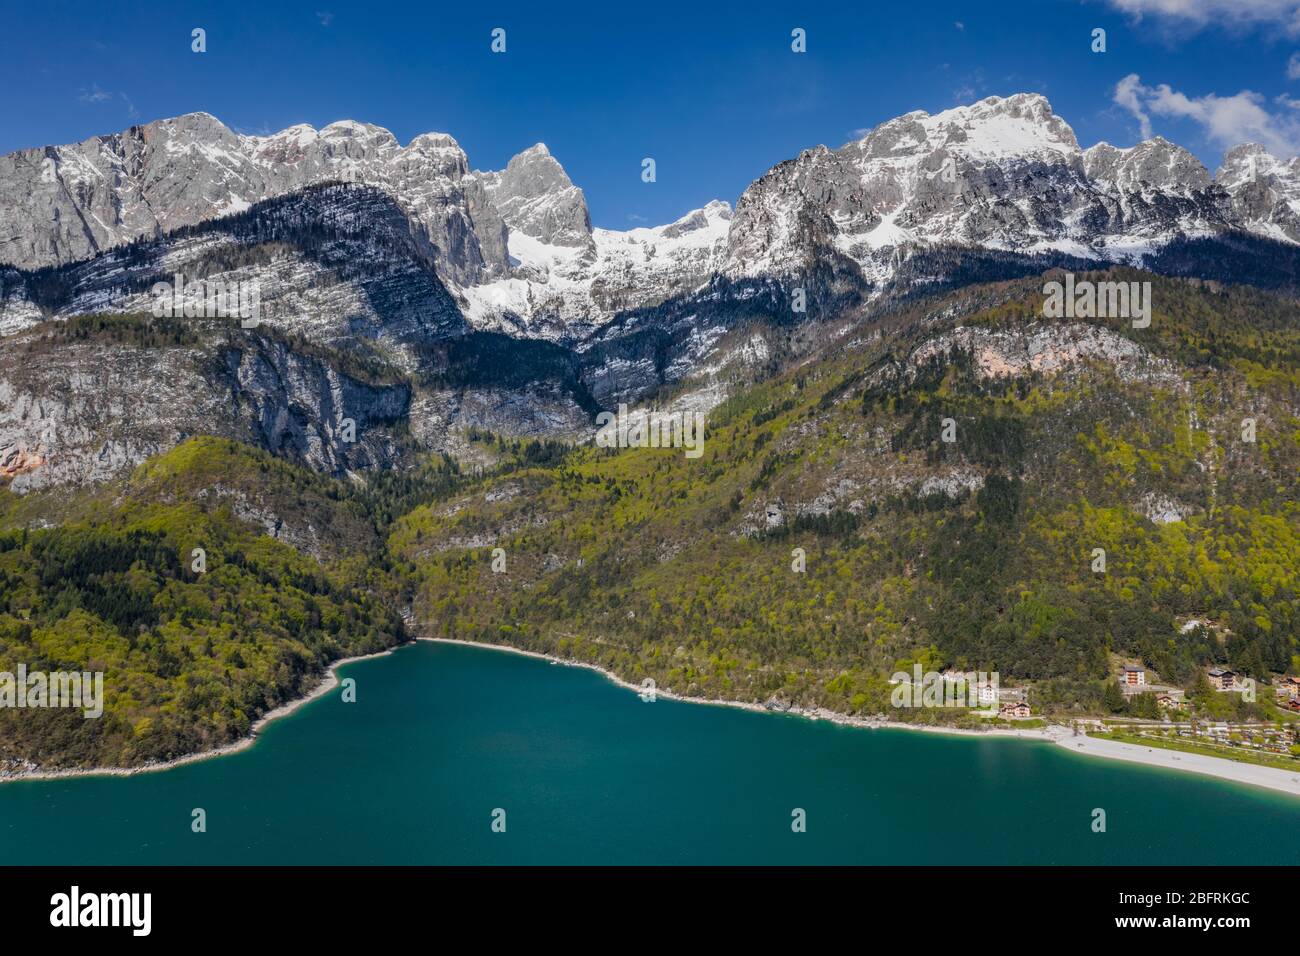 The Improbable aerial landscape of village Molveno, Italy, azure water of lake, empty beach, snow covered mountains Dolomites on background, roof top Stock Photo